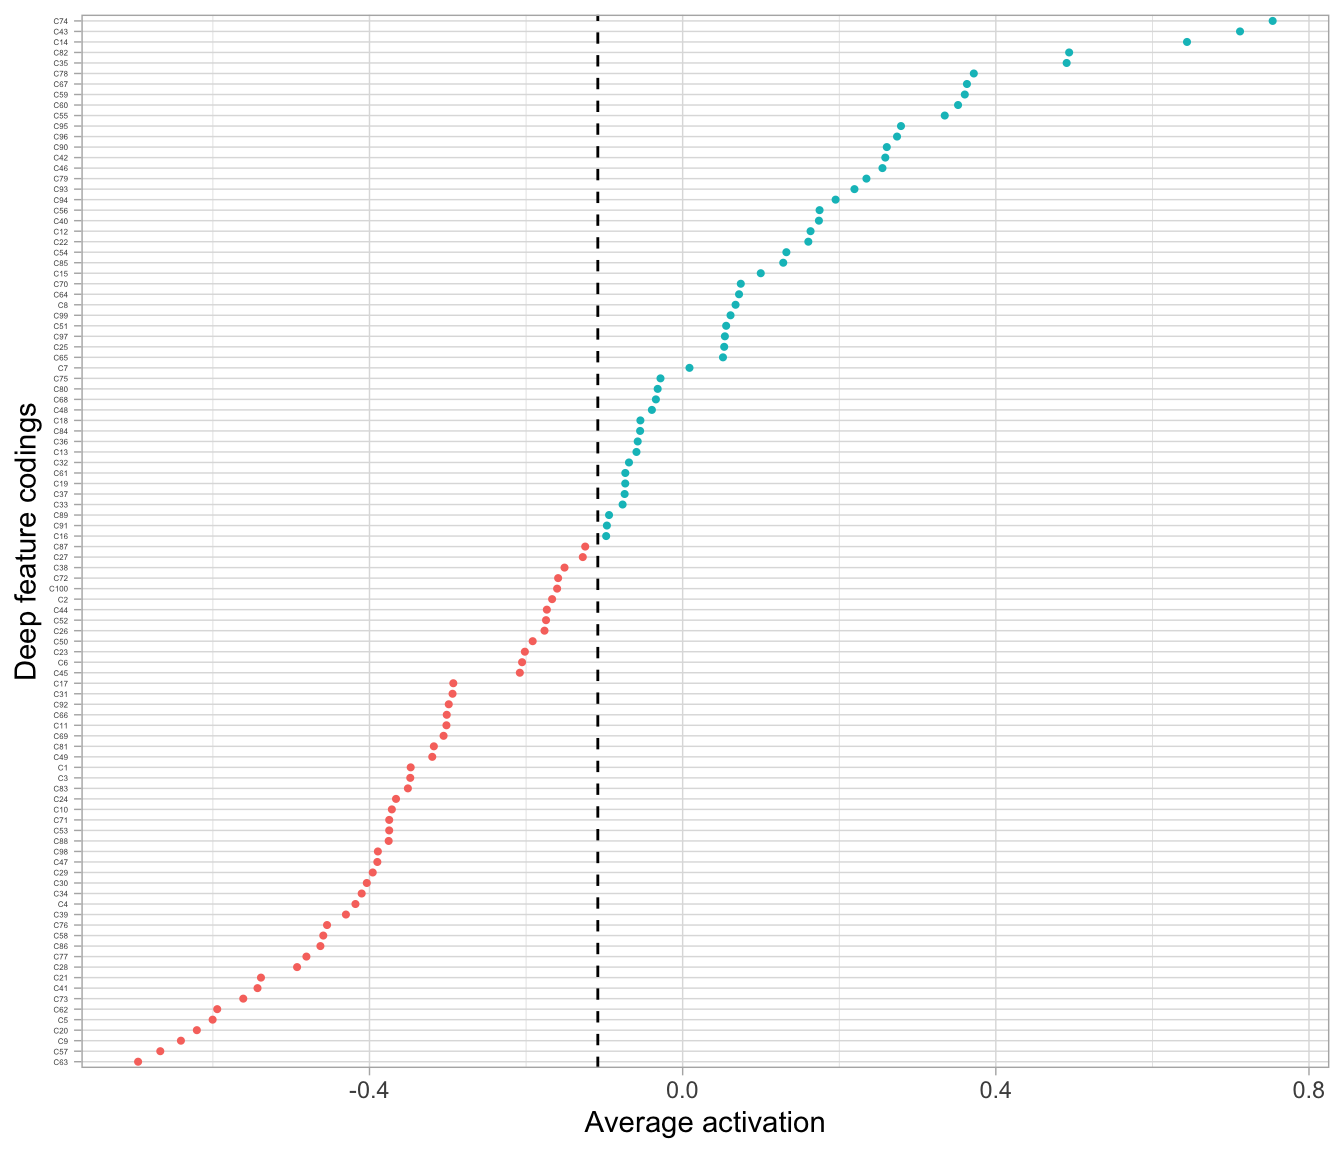 The average activation of the coding neurons in our sparse autoencoder is now -0.108.